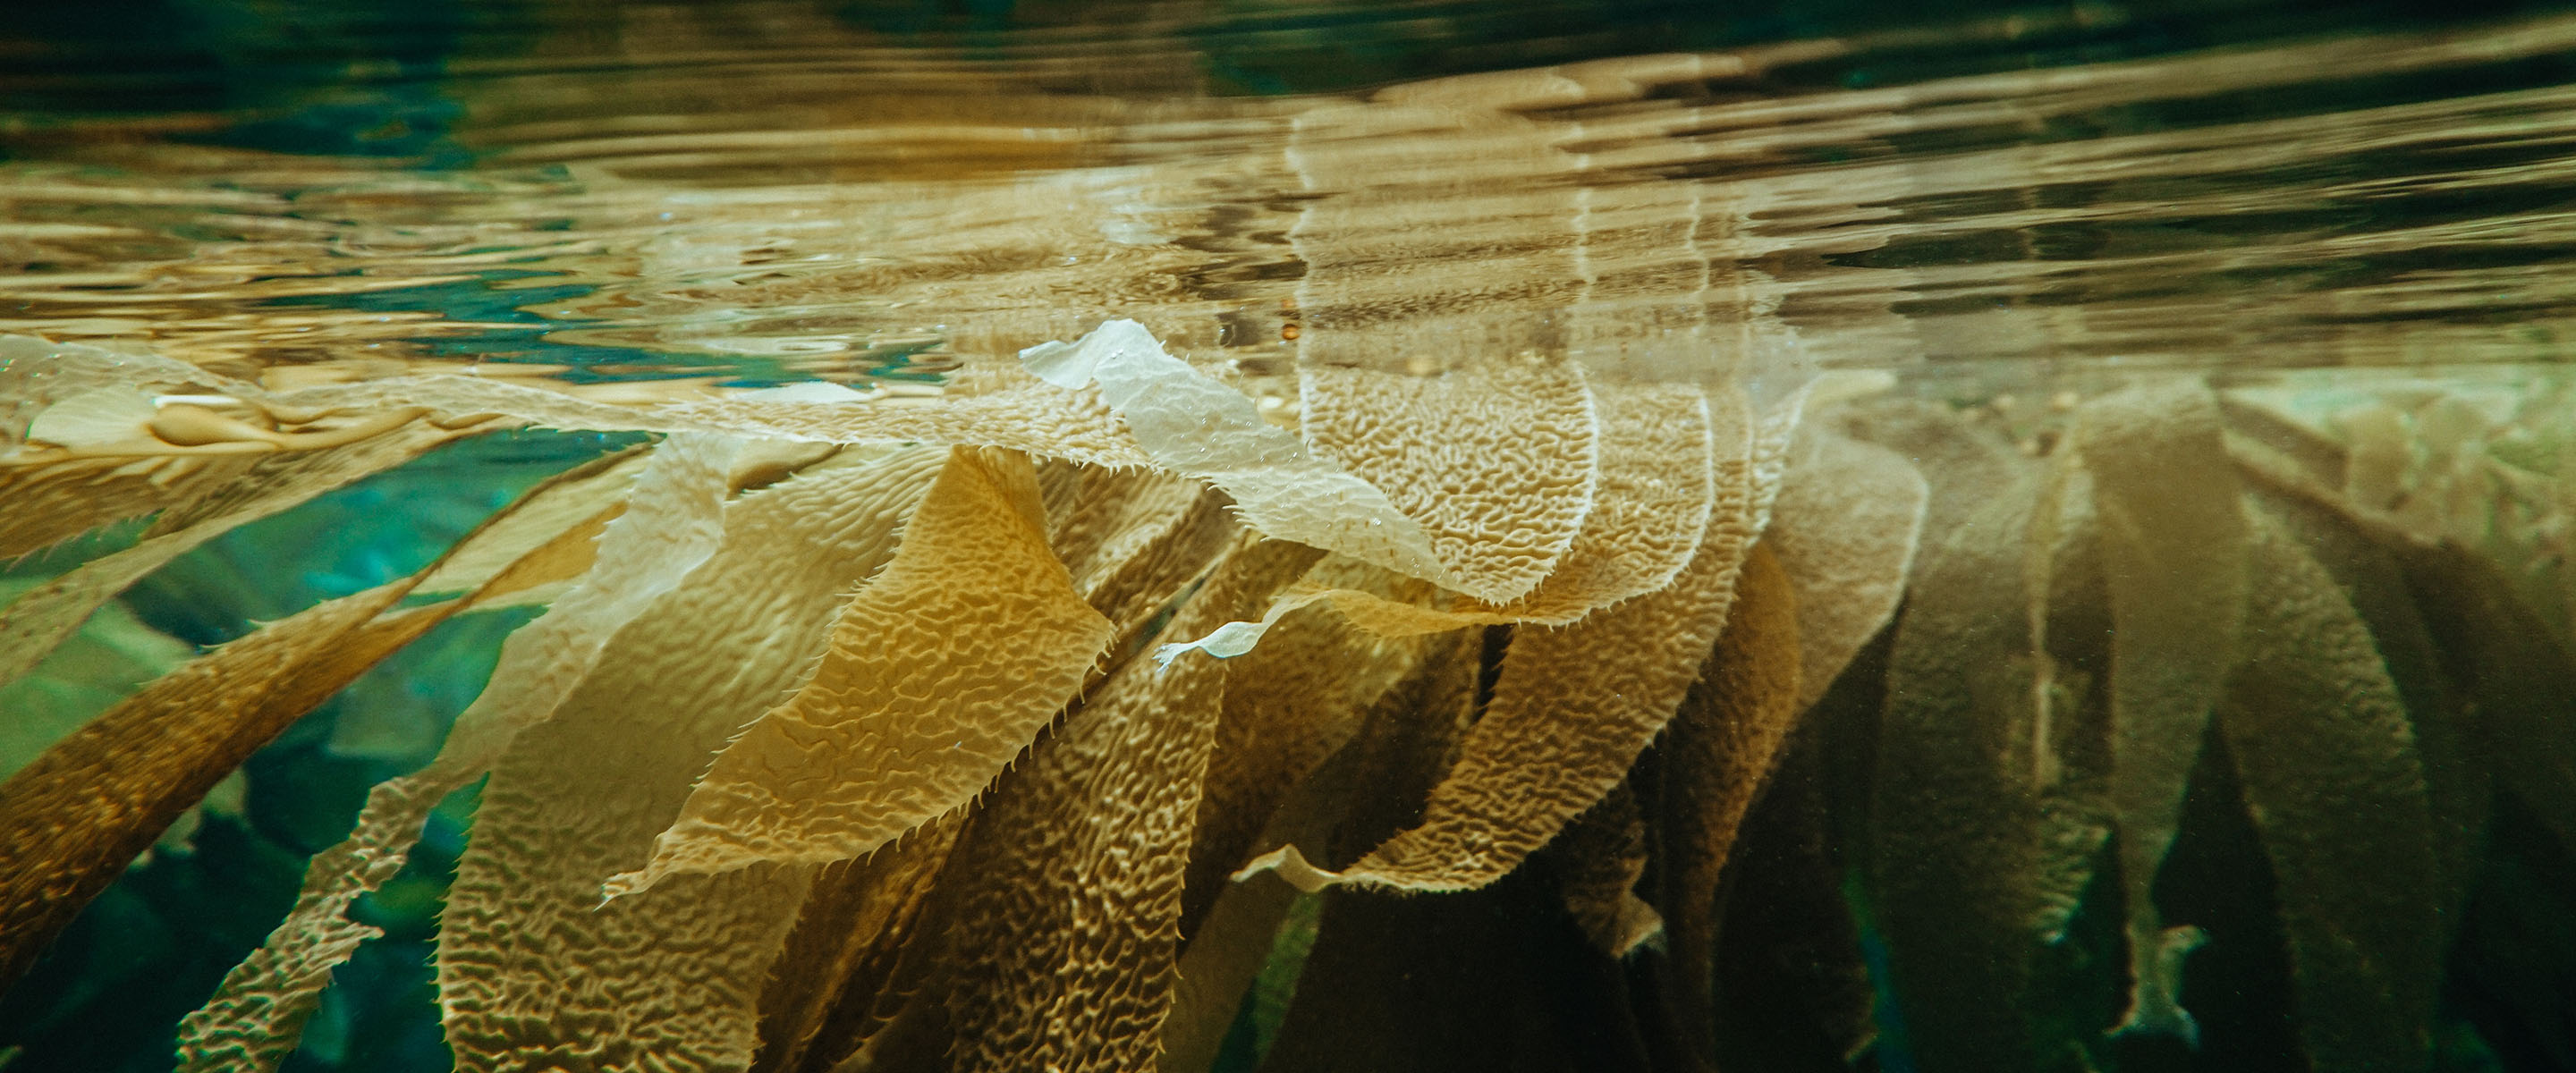 Plants like kelp are great at soaking up carbon dioxide.